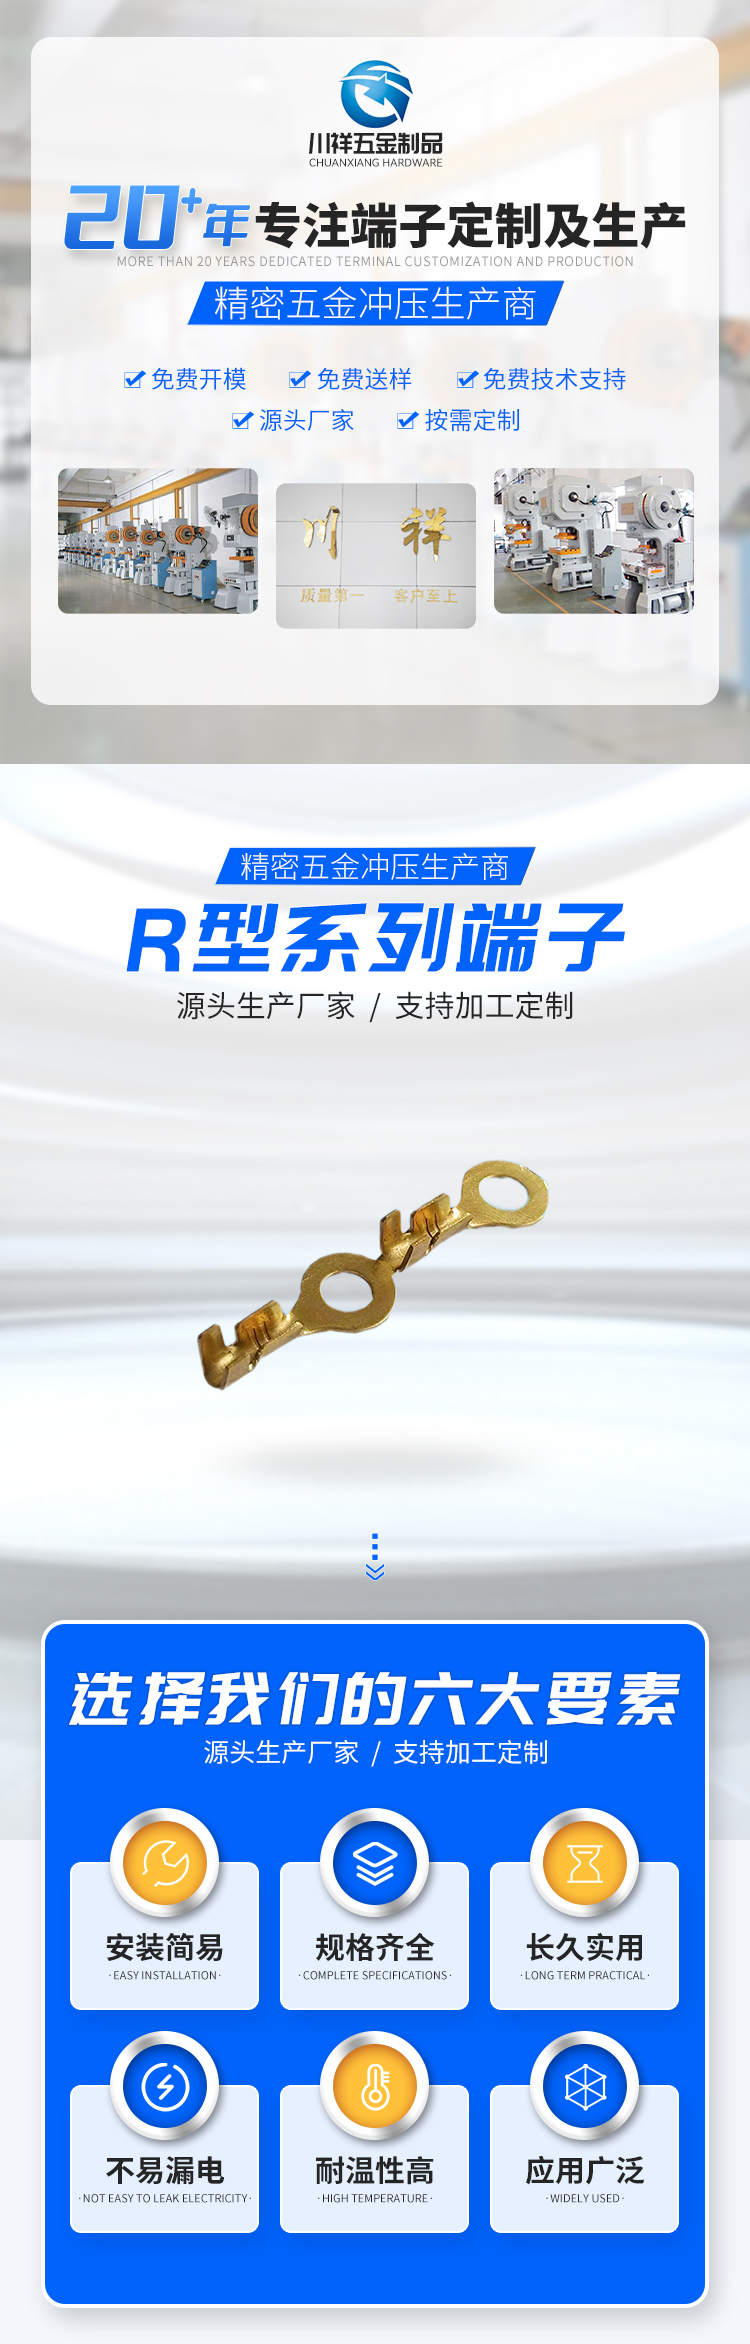 Chuanxiang 7538 terminal cold pressed wire harness wiring connector R-type series can be customized and produced according to needs